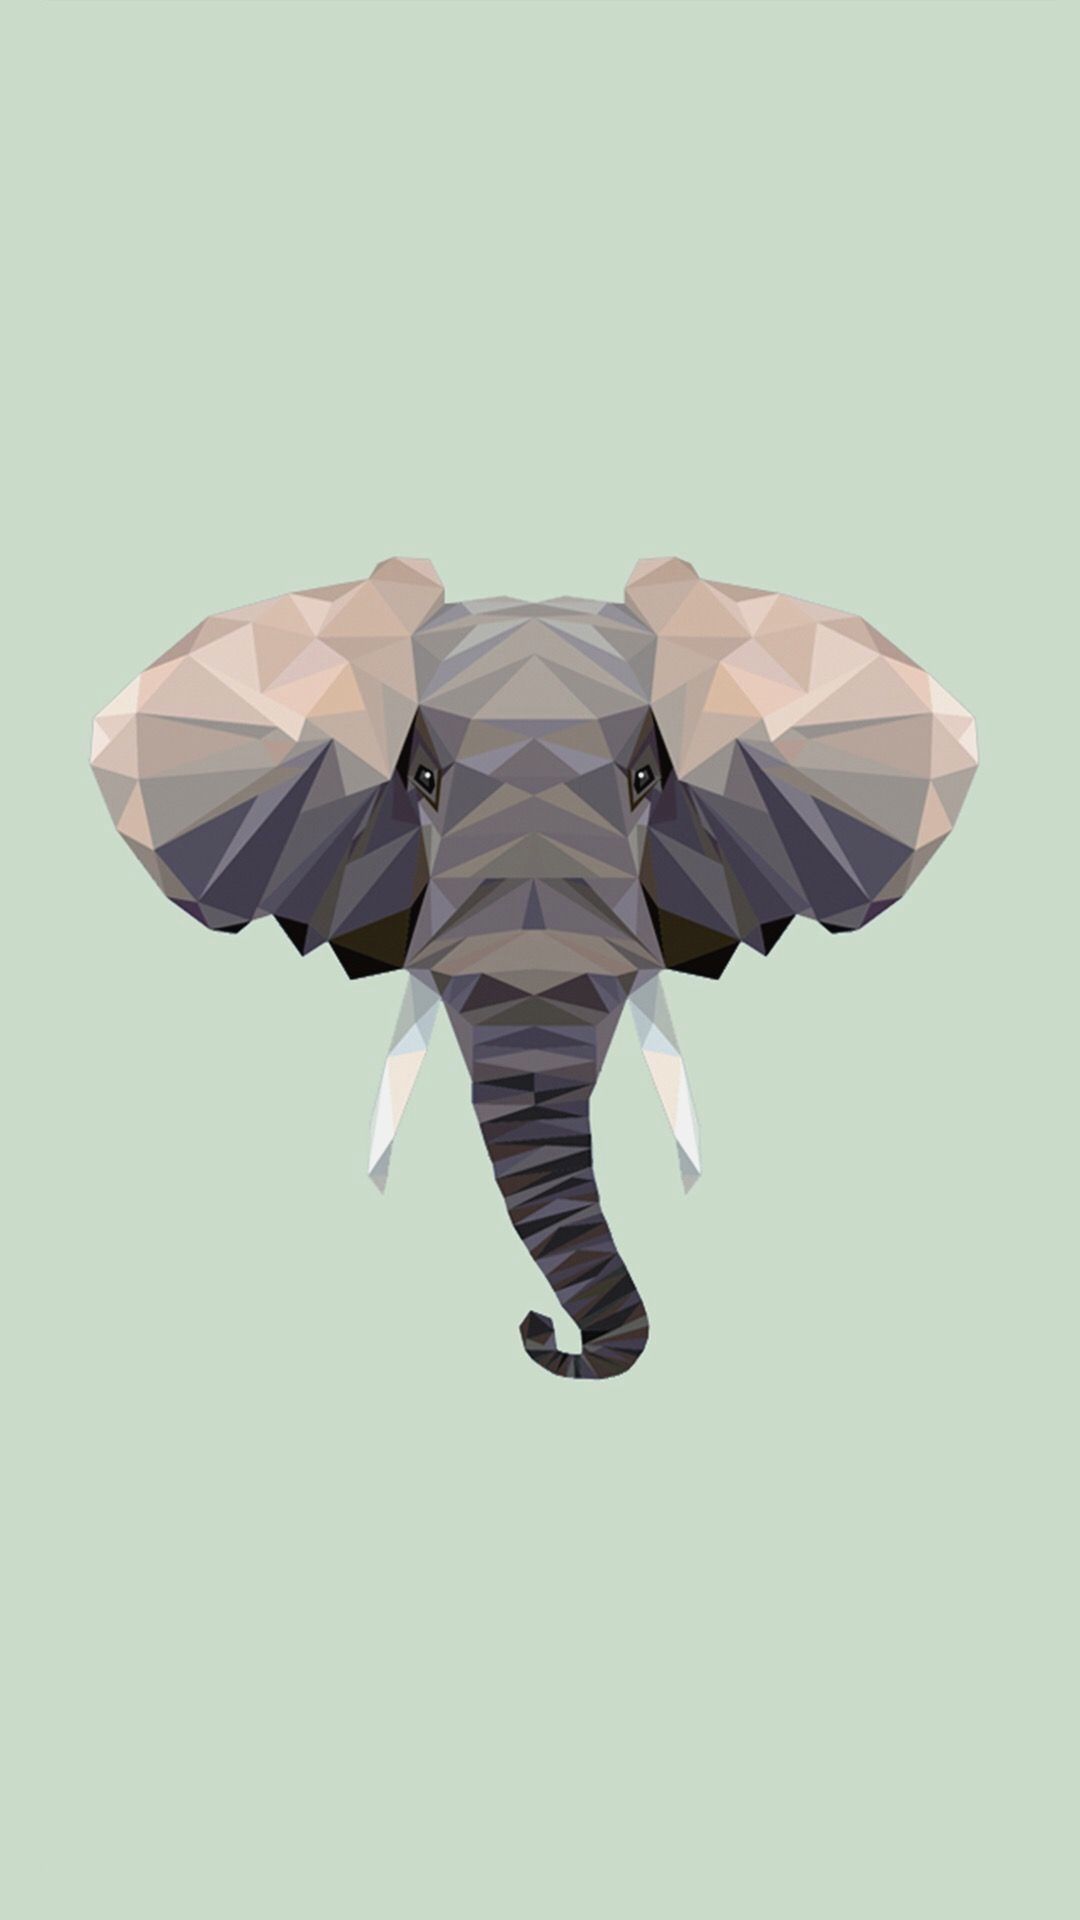 Cute Elephant Iphone Wallpapers Wallpapers